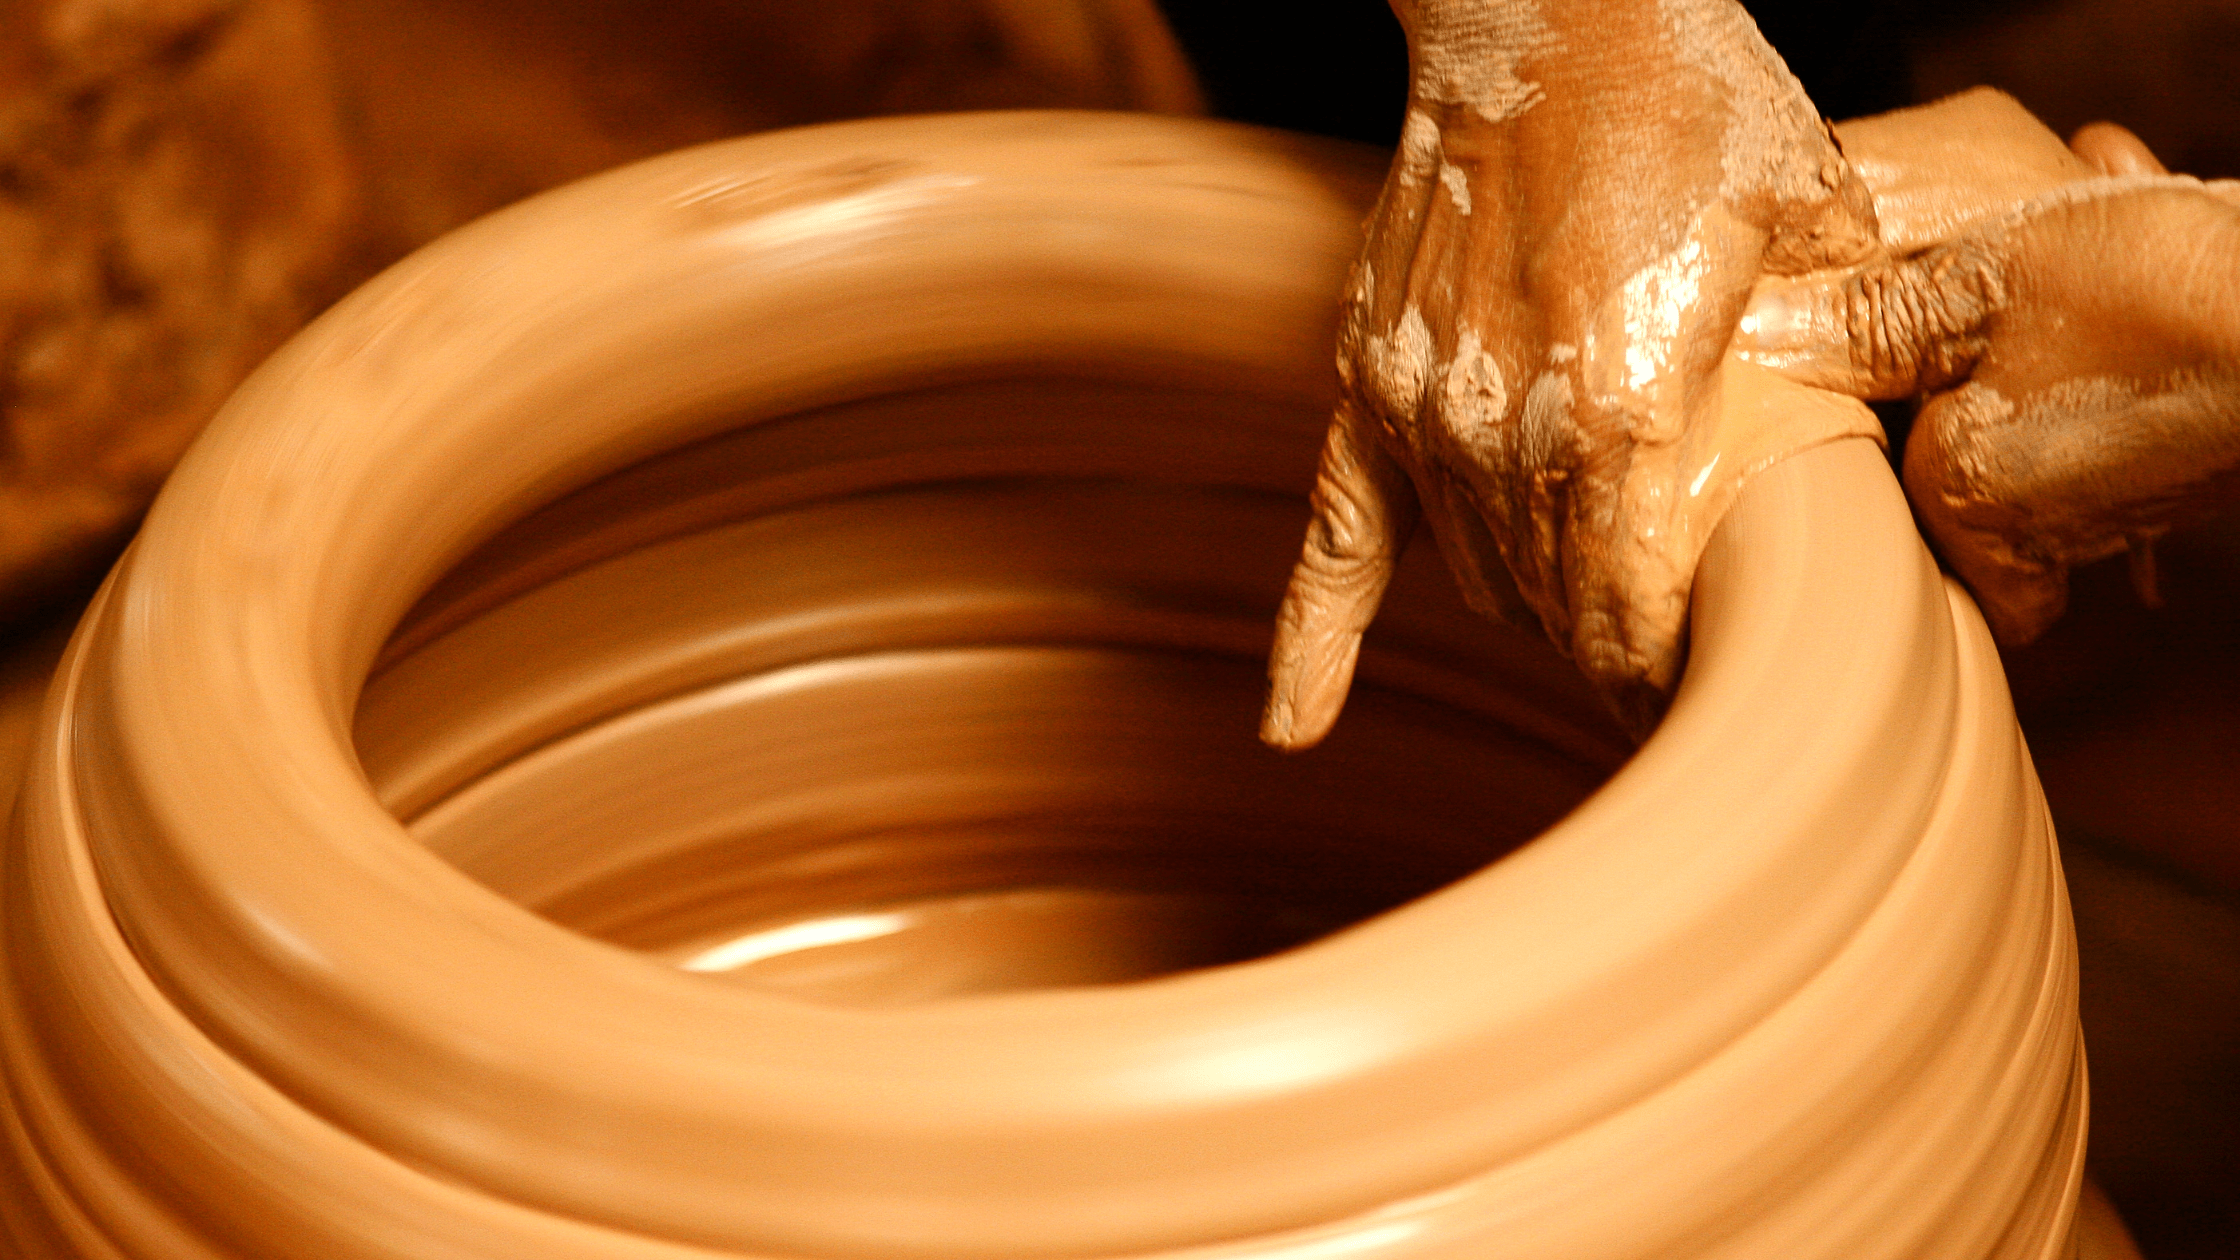 a potter's hands shaping a lump of clay into a pot